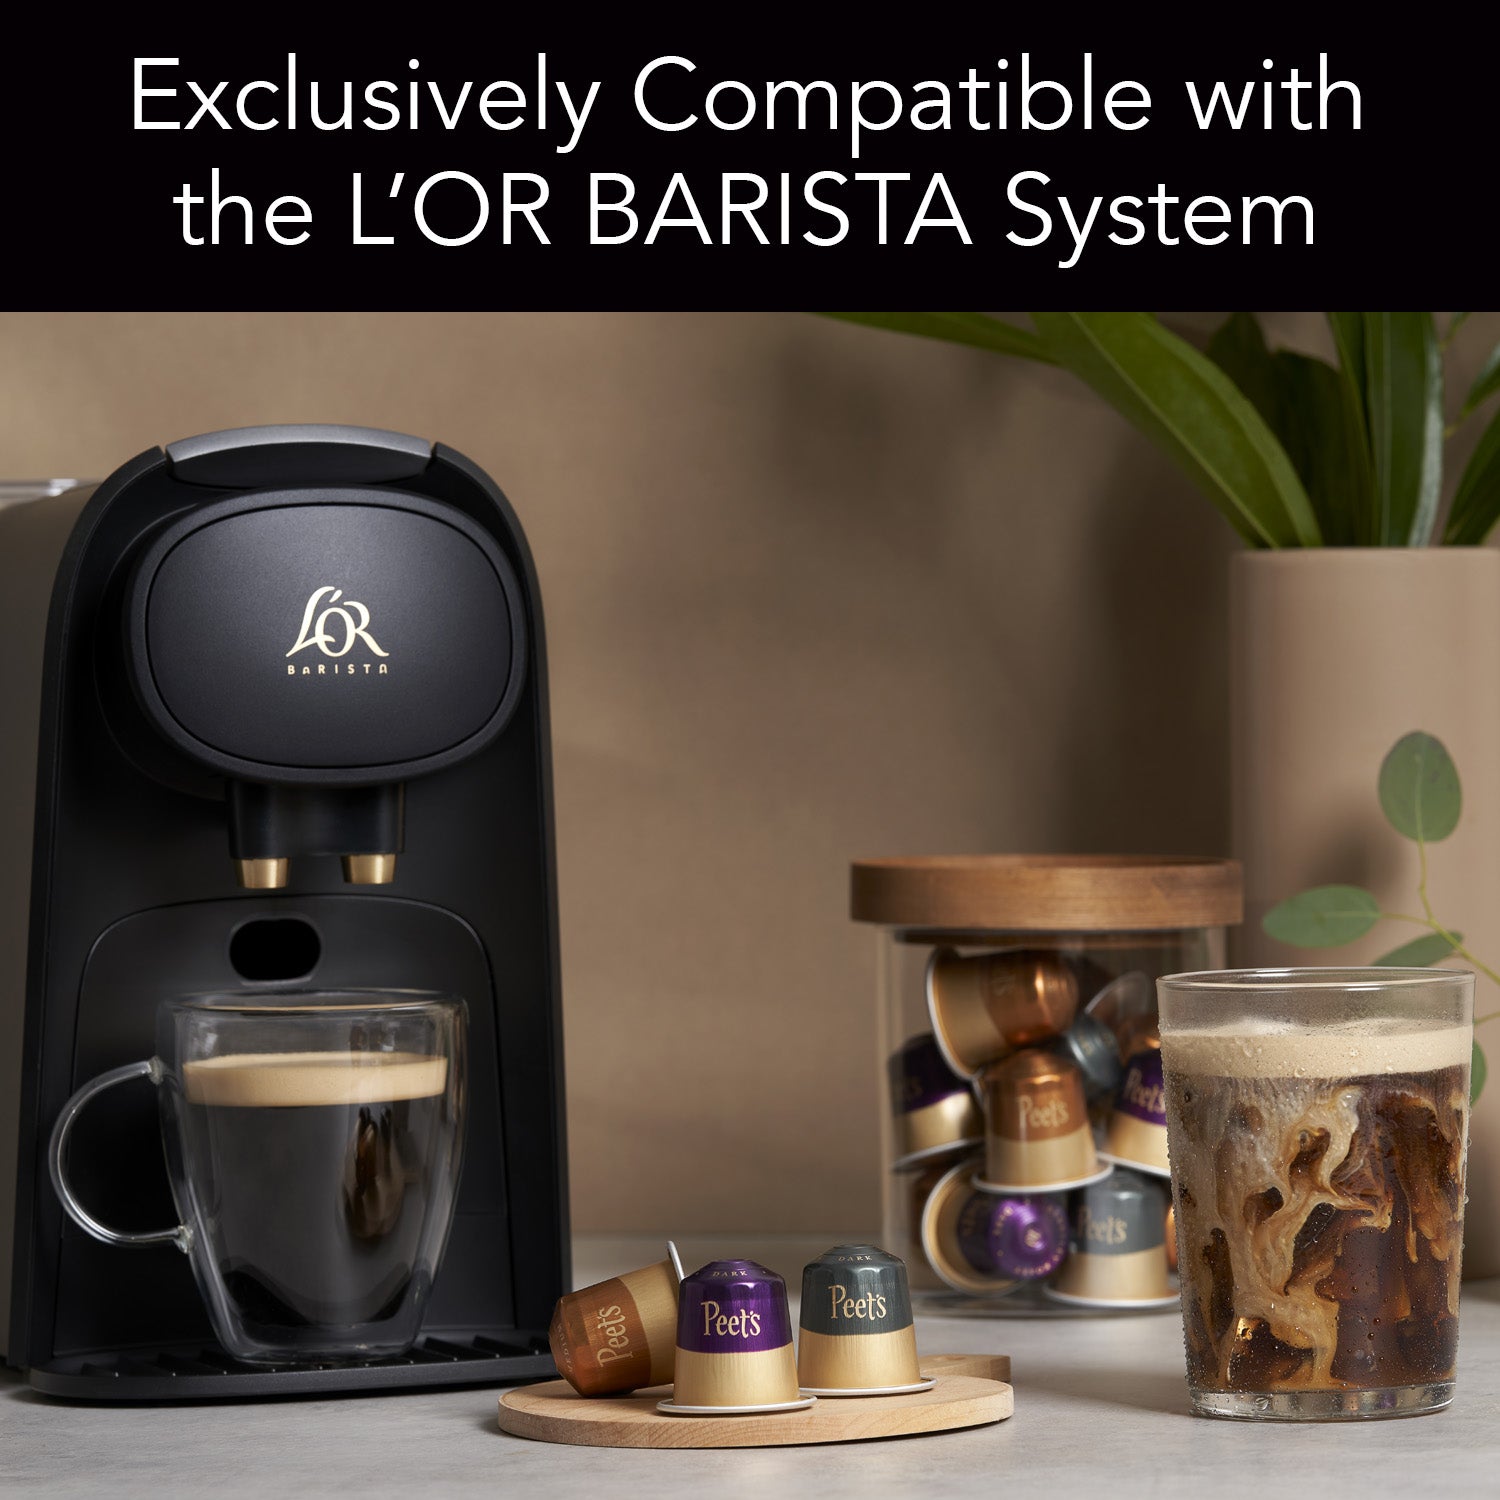 L'OR Barista System Coffee and Espresso Machine with 30 Peet's Cafe  Collection Coffee Pods